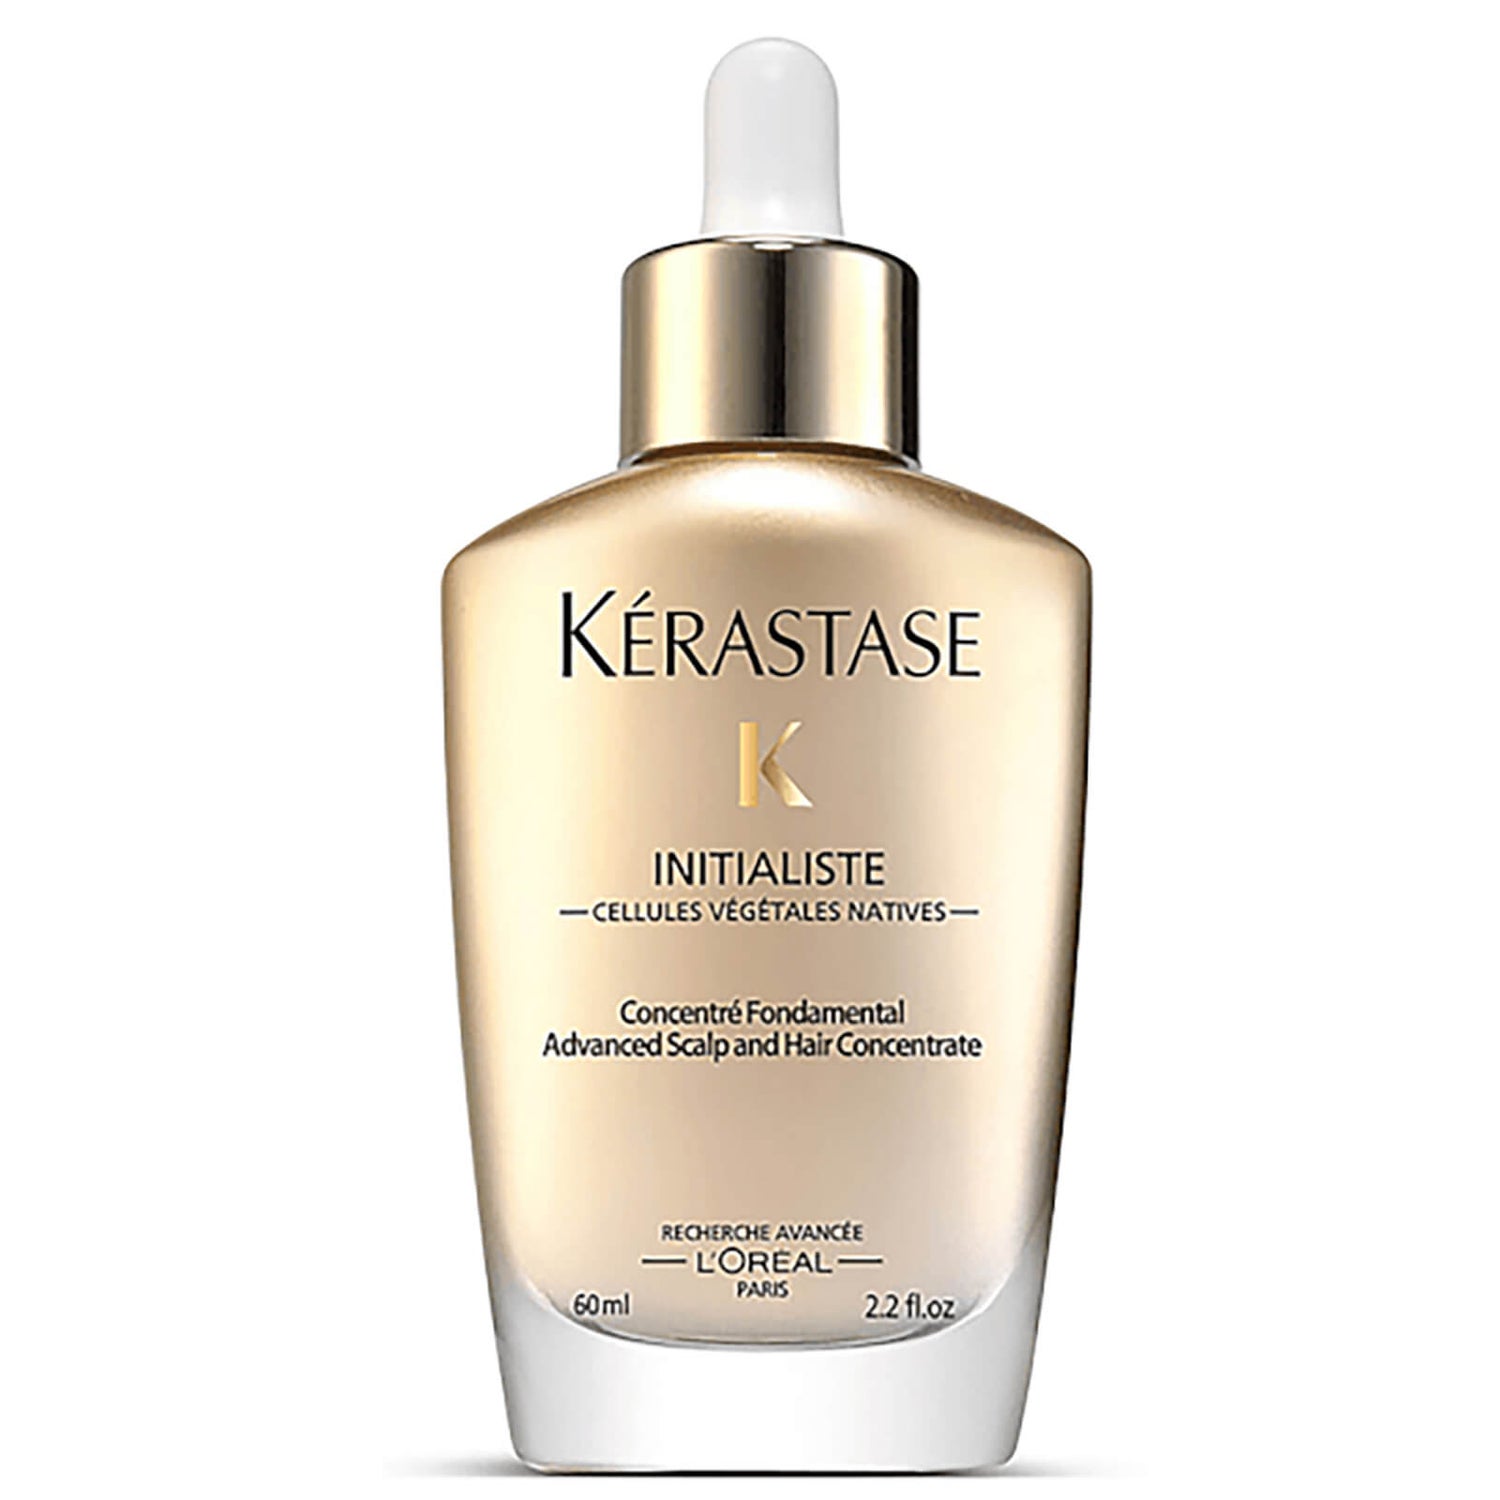 Kérastase Initialiste Advanced and Concentrate 60ml - LOOKFANTASTIC